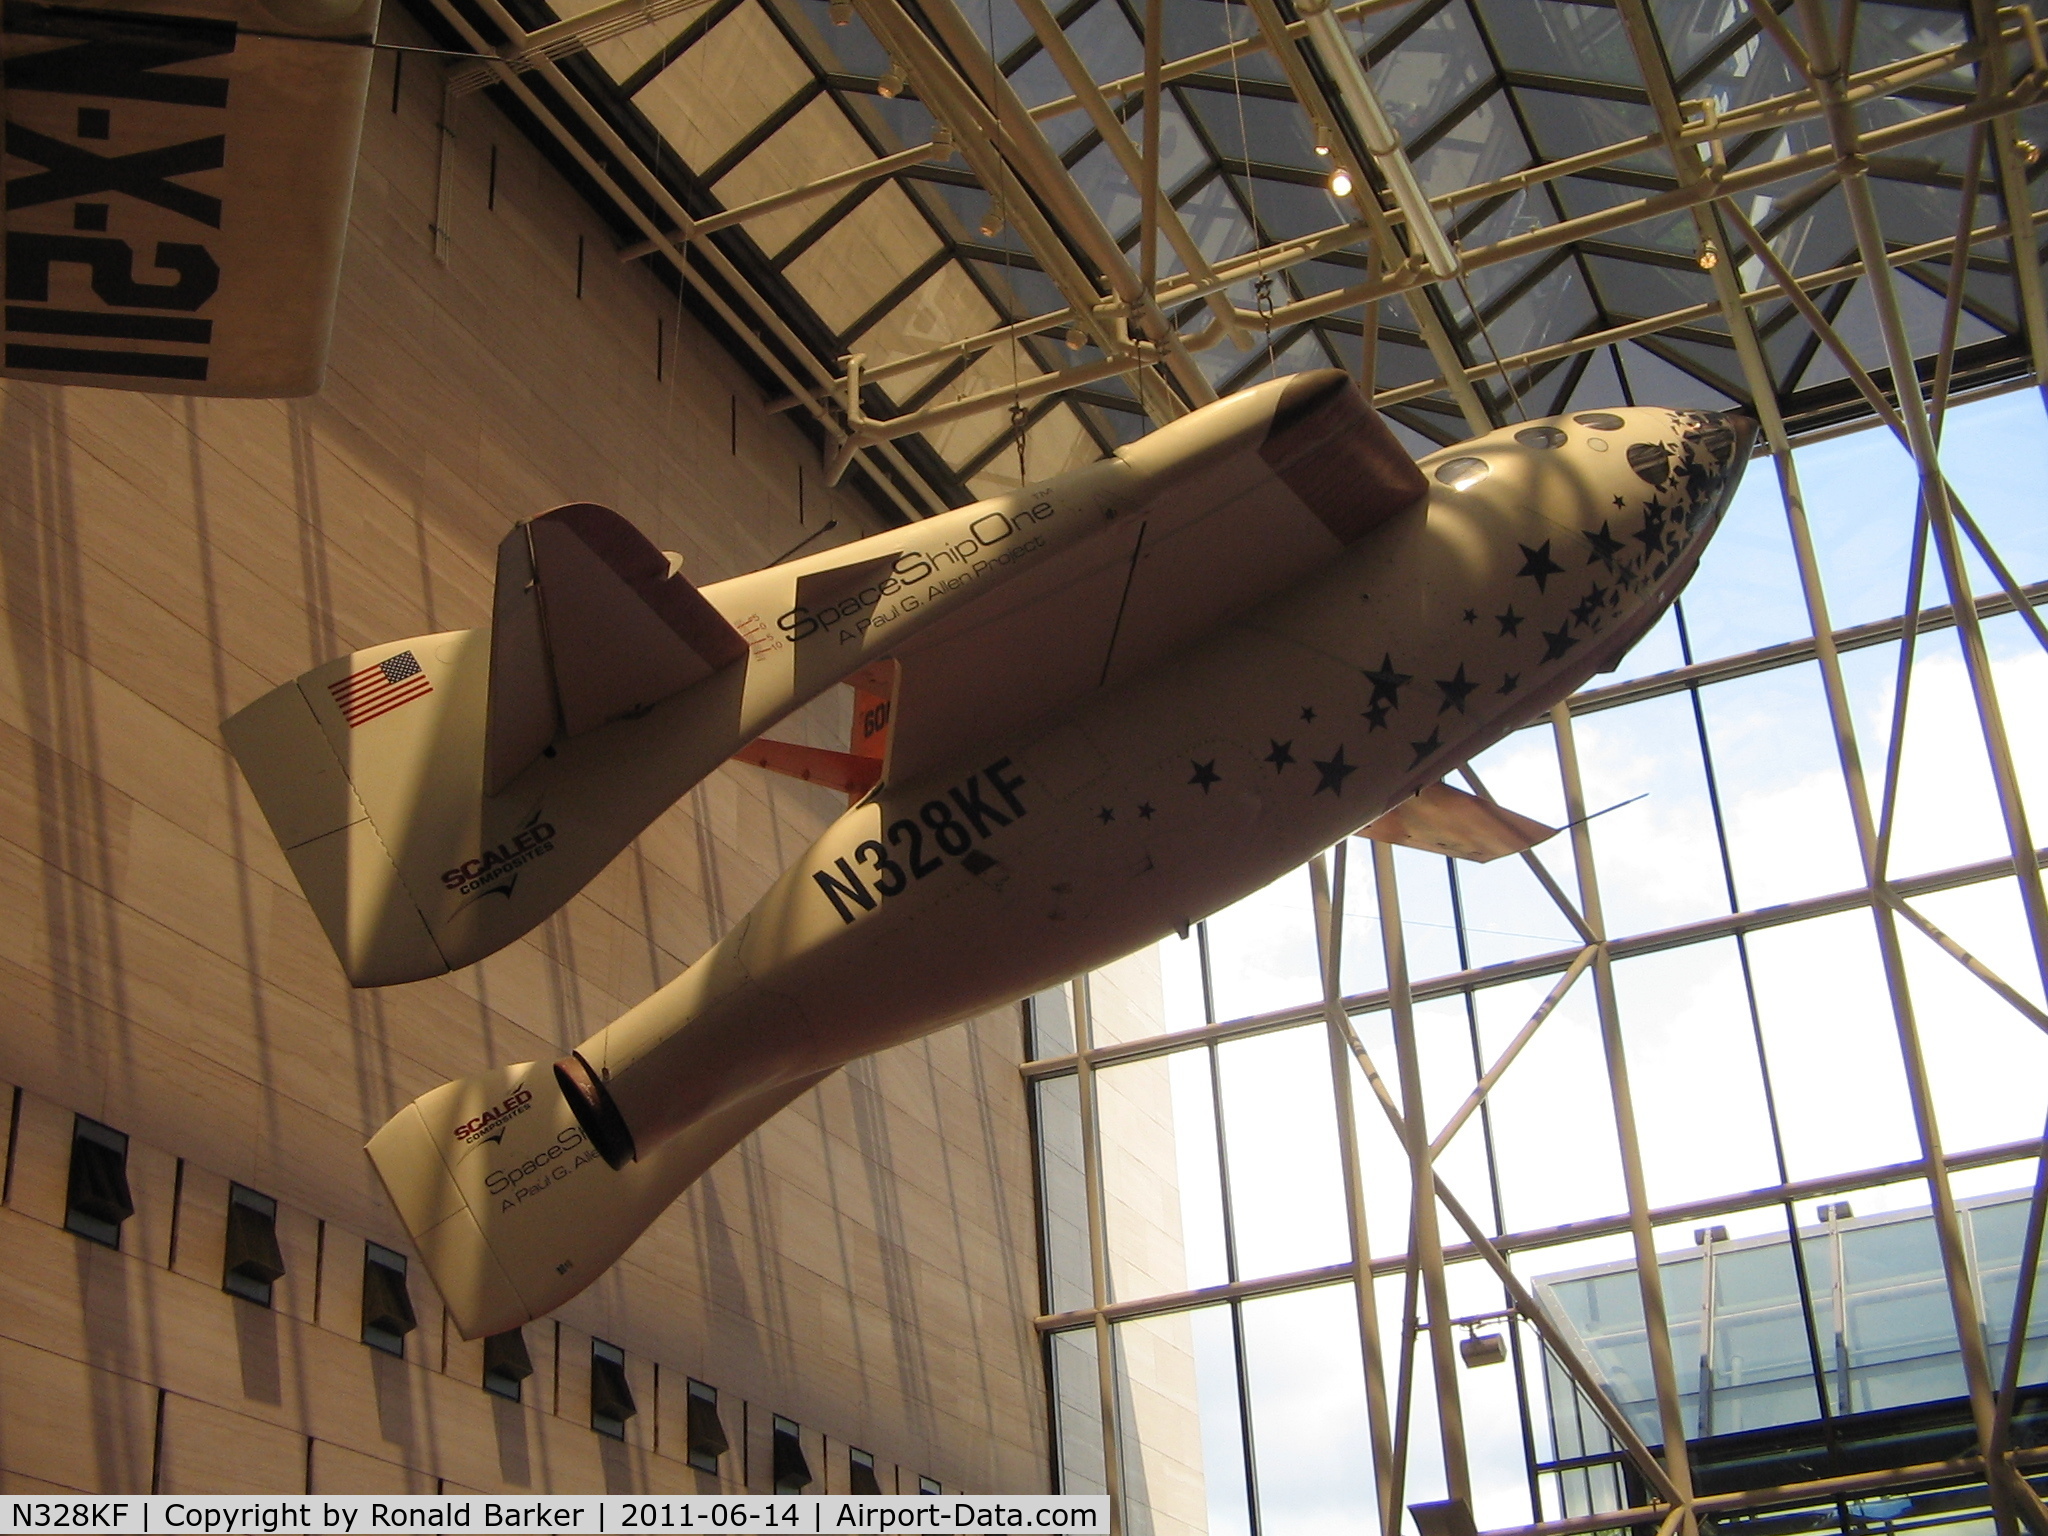 N328KF, 2003 Scaled Composites 316 C/N 001, National Air and Space Museum